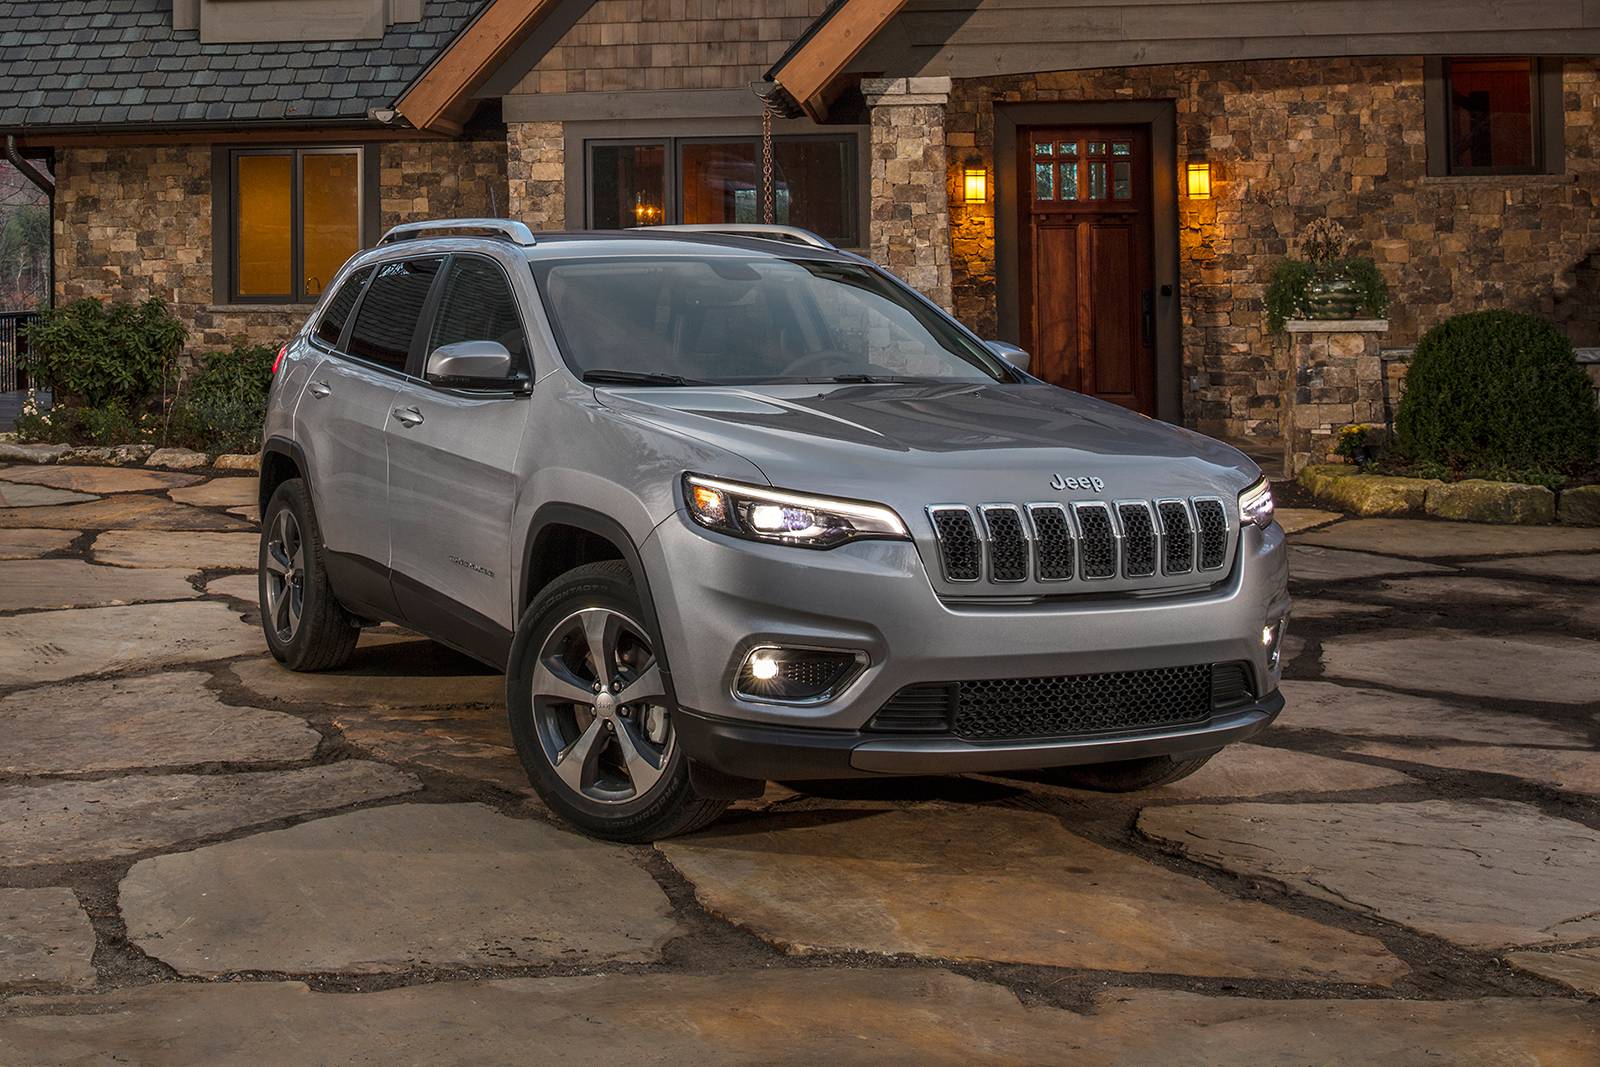 2019 Jeep Cherokee Review & Ratings | Edmunds